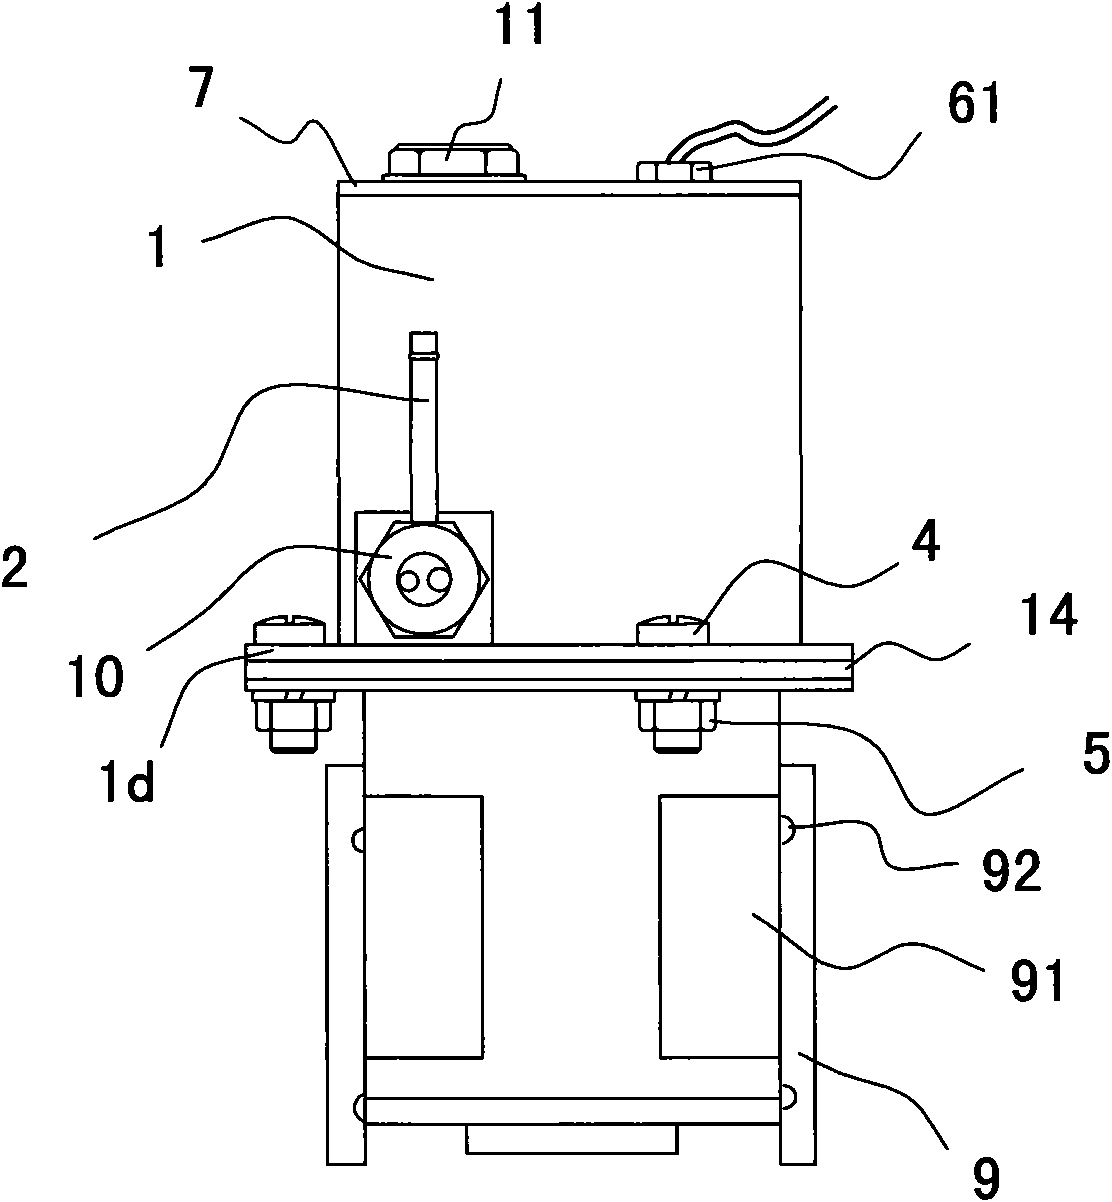 Direct-current power-driven vacuum pump used for automobile